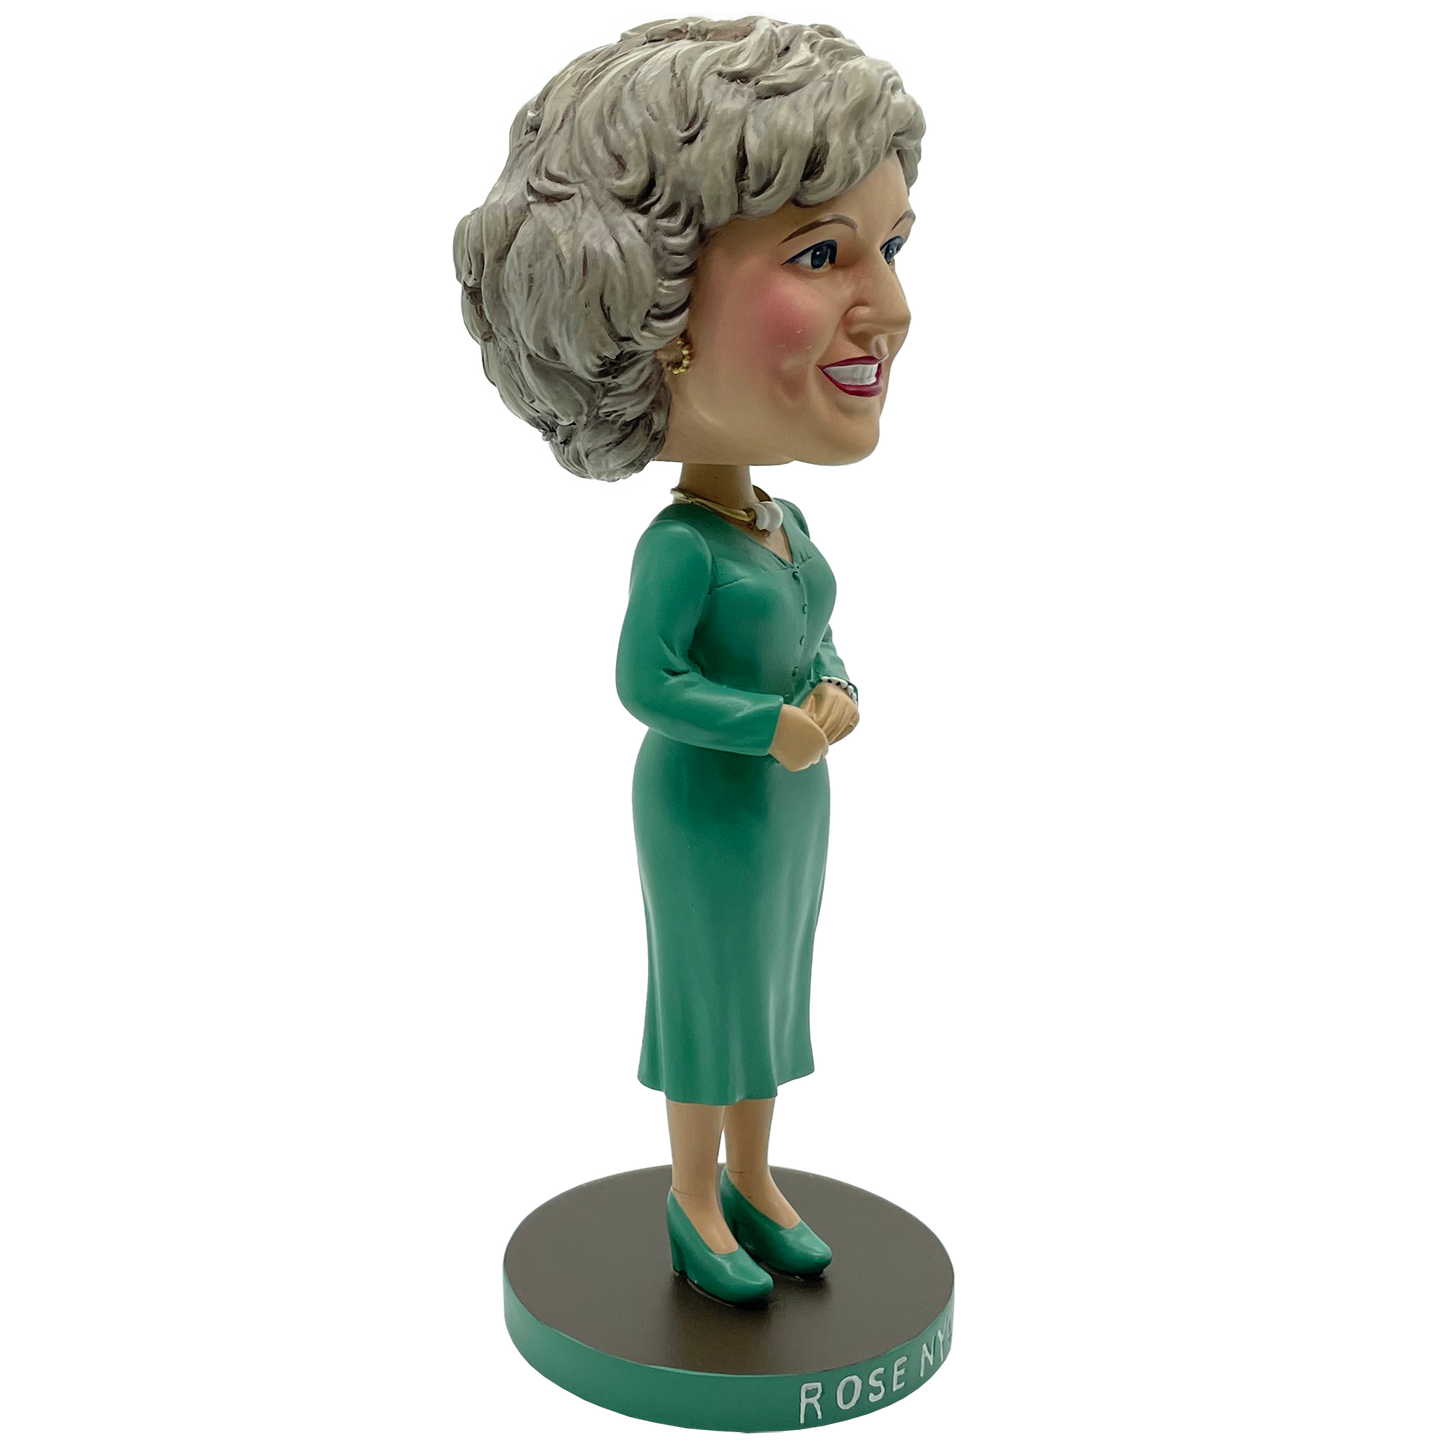 The Golden Girls Rose Nylund Green Dress Polystone Bobblehead (National Bobblehead Hall of Fame Exclusive) - Available 3rd Quarter 2022 - Icon Heroes 